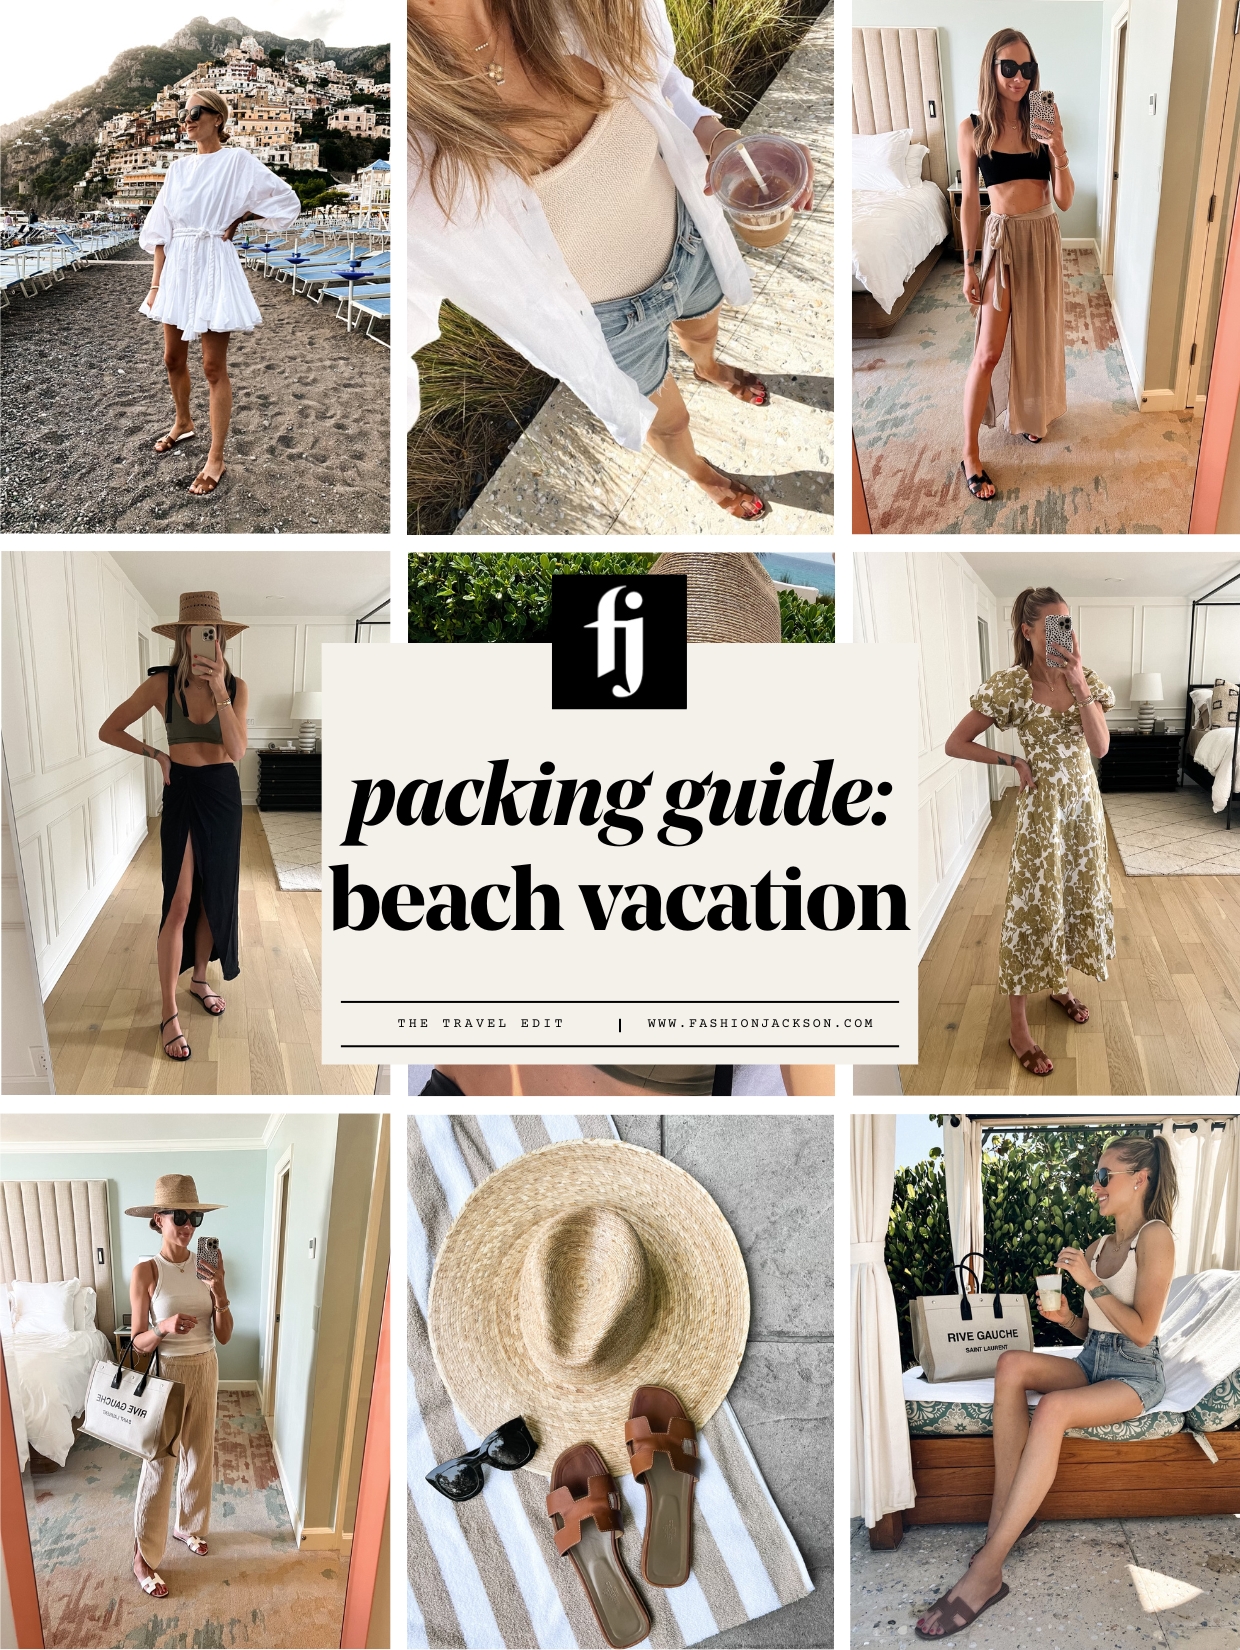 What to Pack for a Beach Vacation - Fashion Jackson